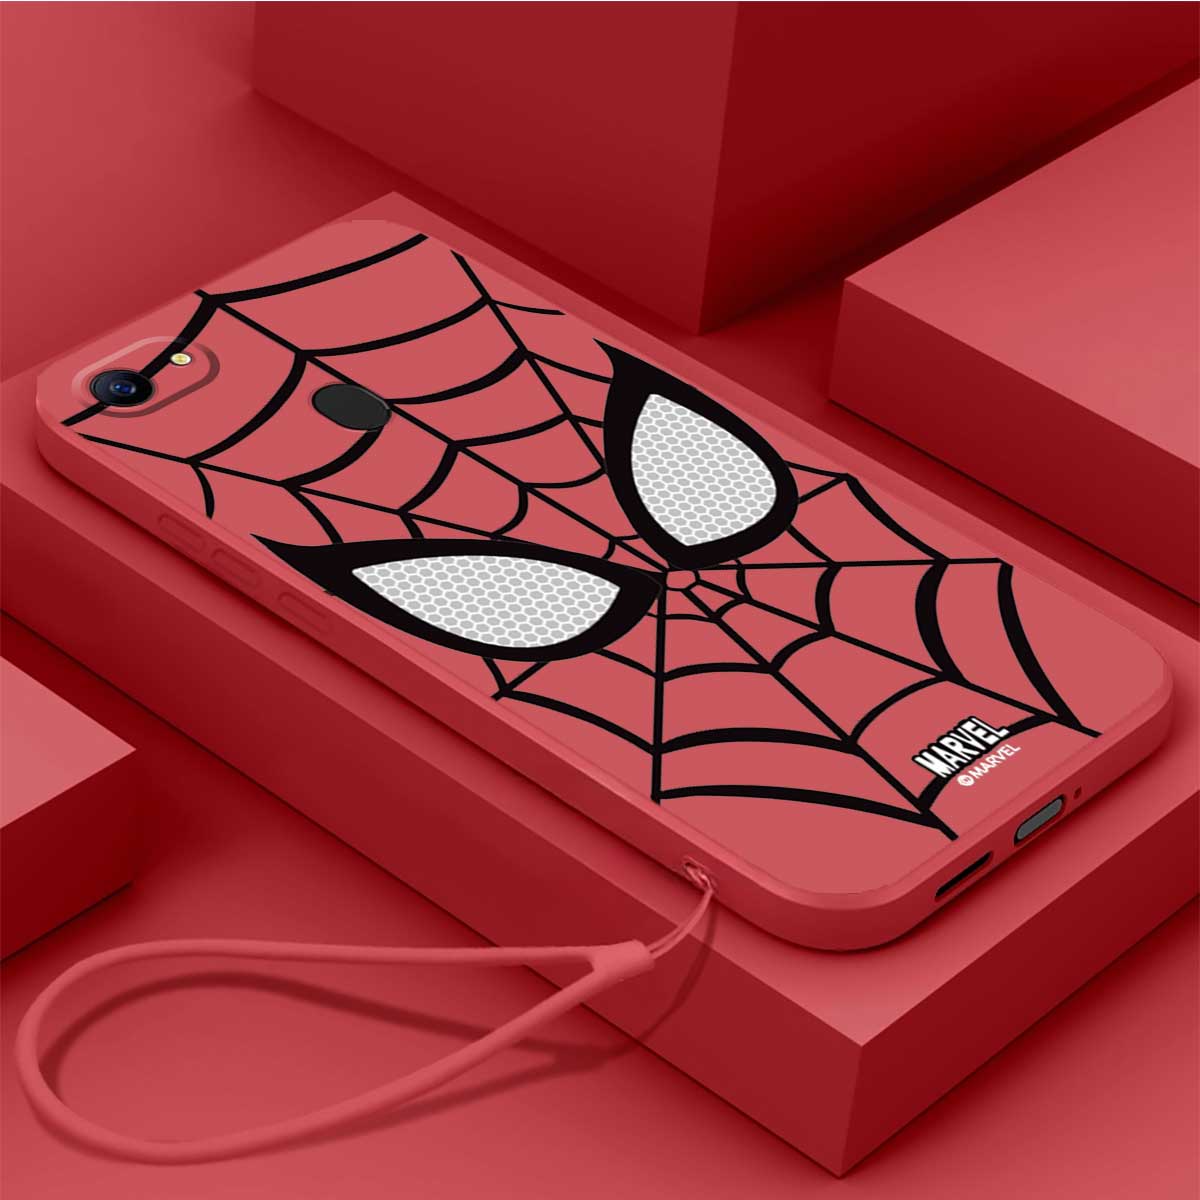 Casing For OPPO F5 OPPO A79 OPPO F5 YOUTH OPPO F7 OPPO F7 Youth Phone Case Spiderman Liquid Silicone Protector Smooth shockproof Bumper Cover With lanyard